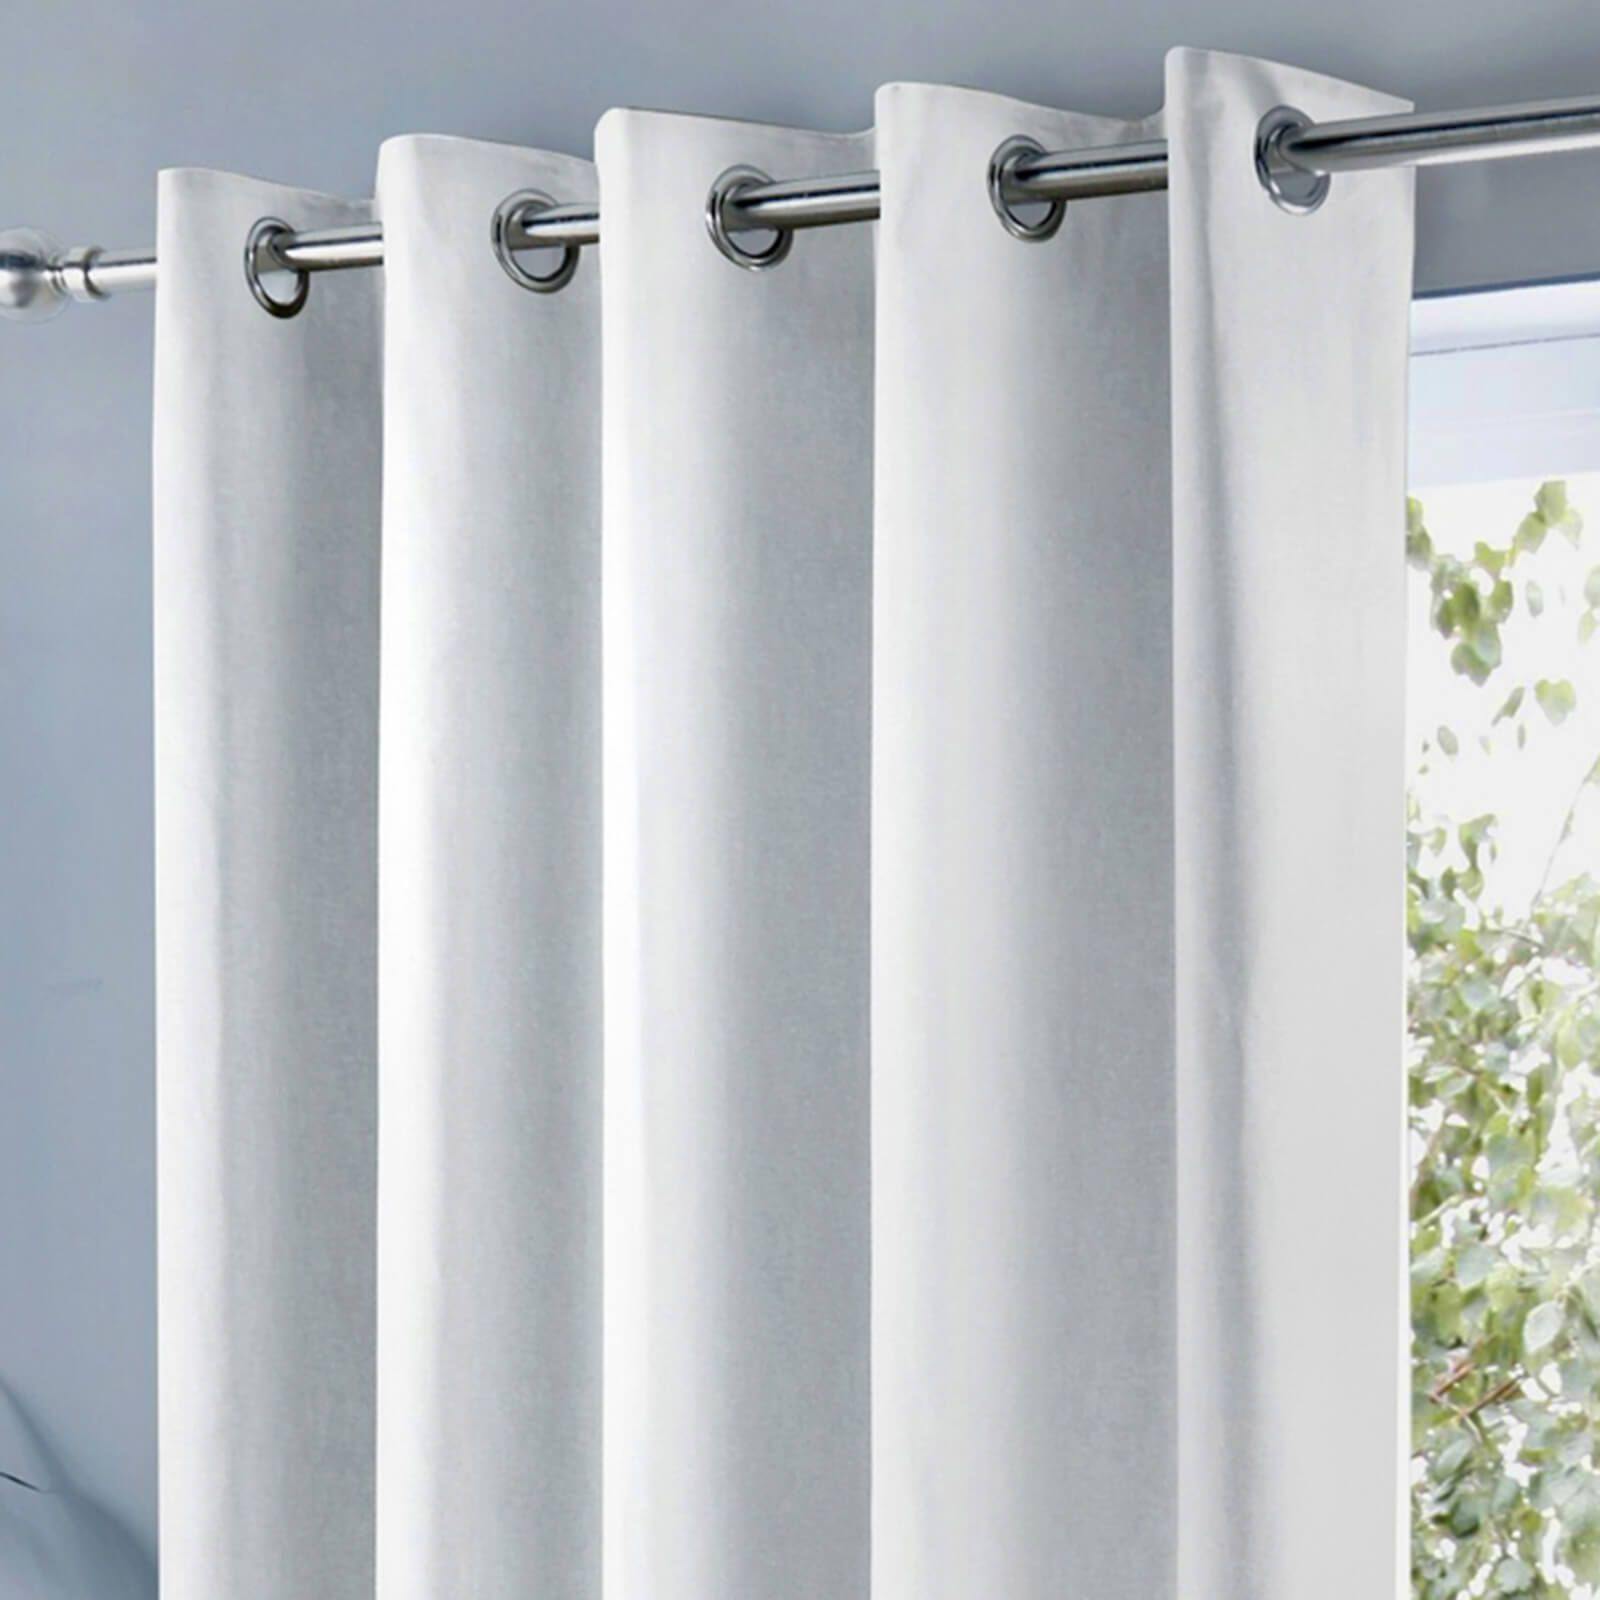 Pack of 2 Plain Dyed Eyelet Curtains with linning - White - DecorStudio - PLAIN DYED CURTAINS